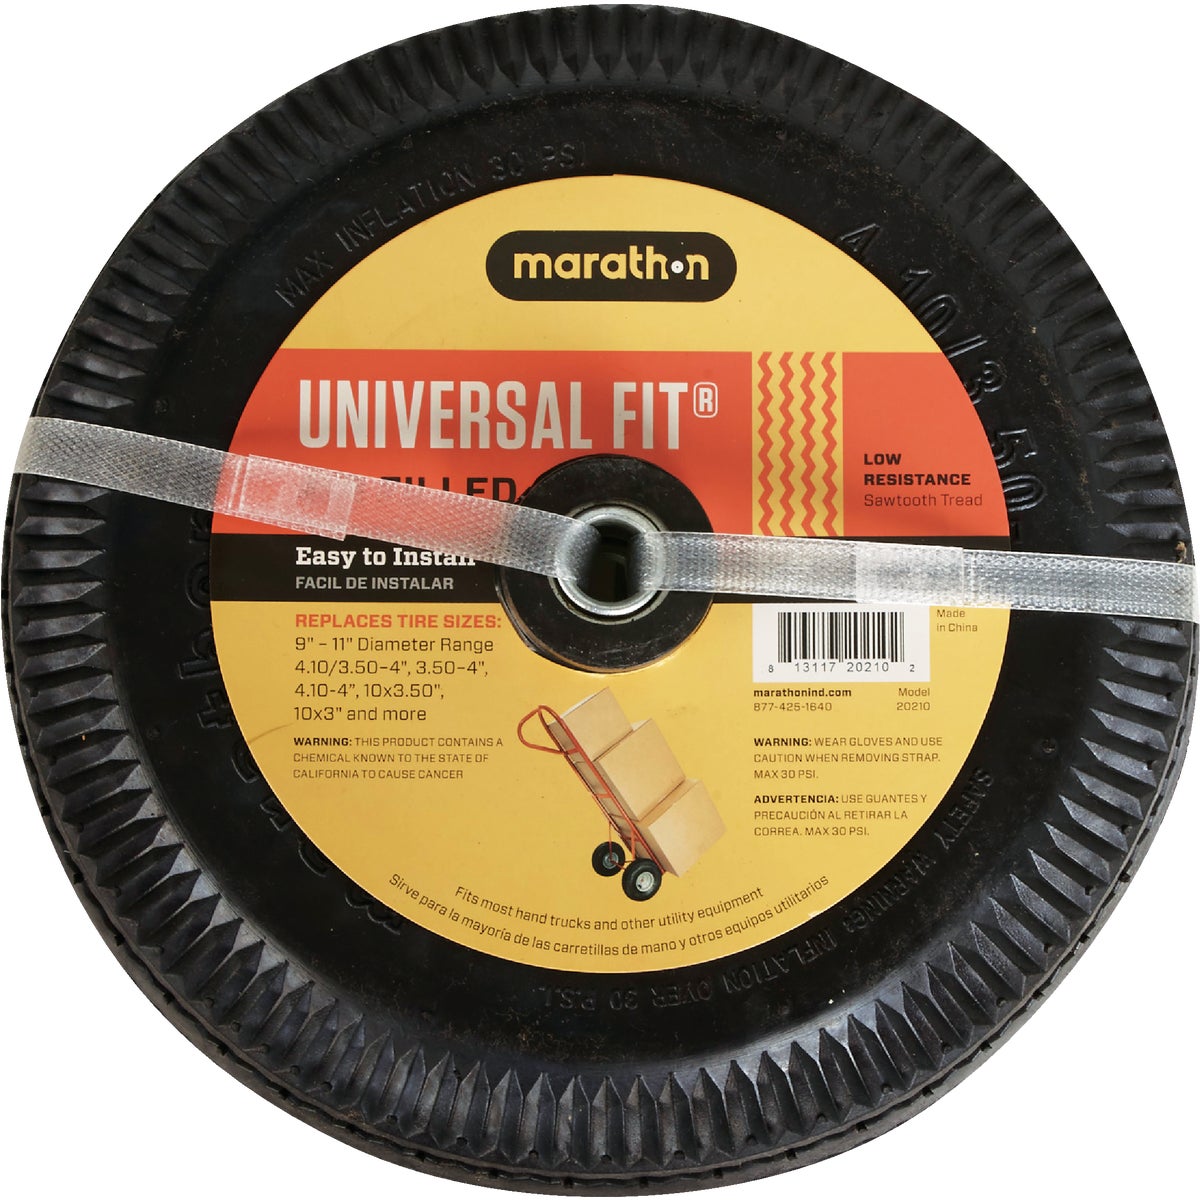 Item 701046, Universal fit air filled hand truck tire, designed to fit the majority of 